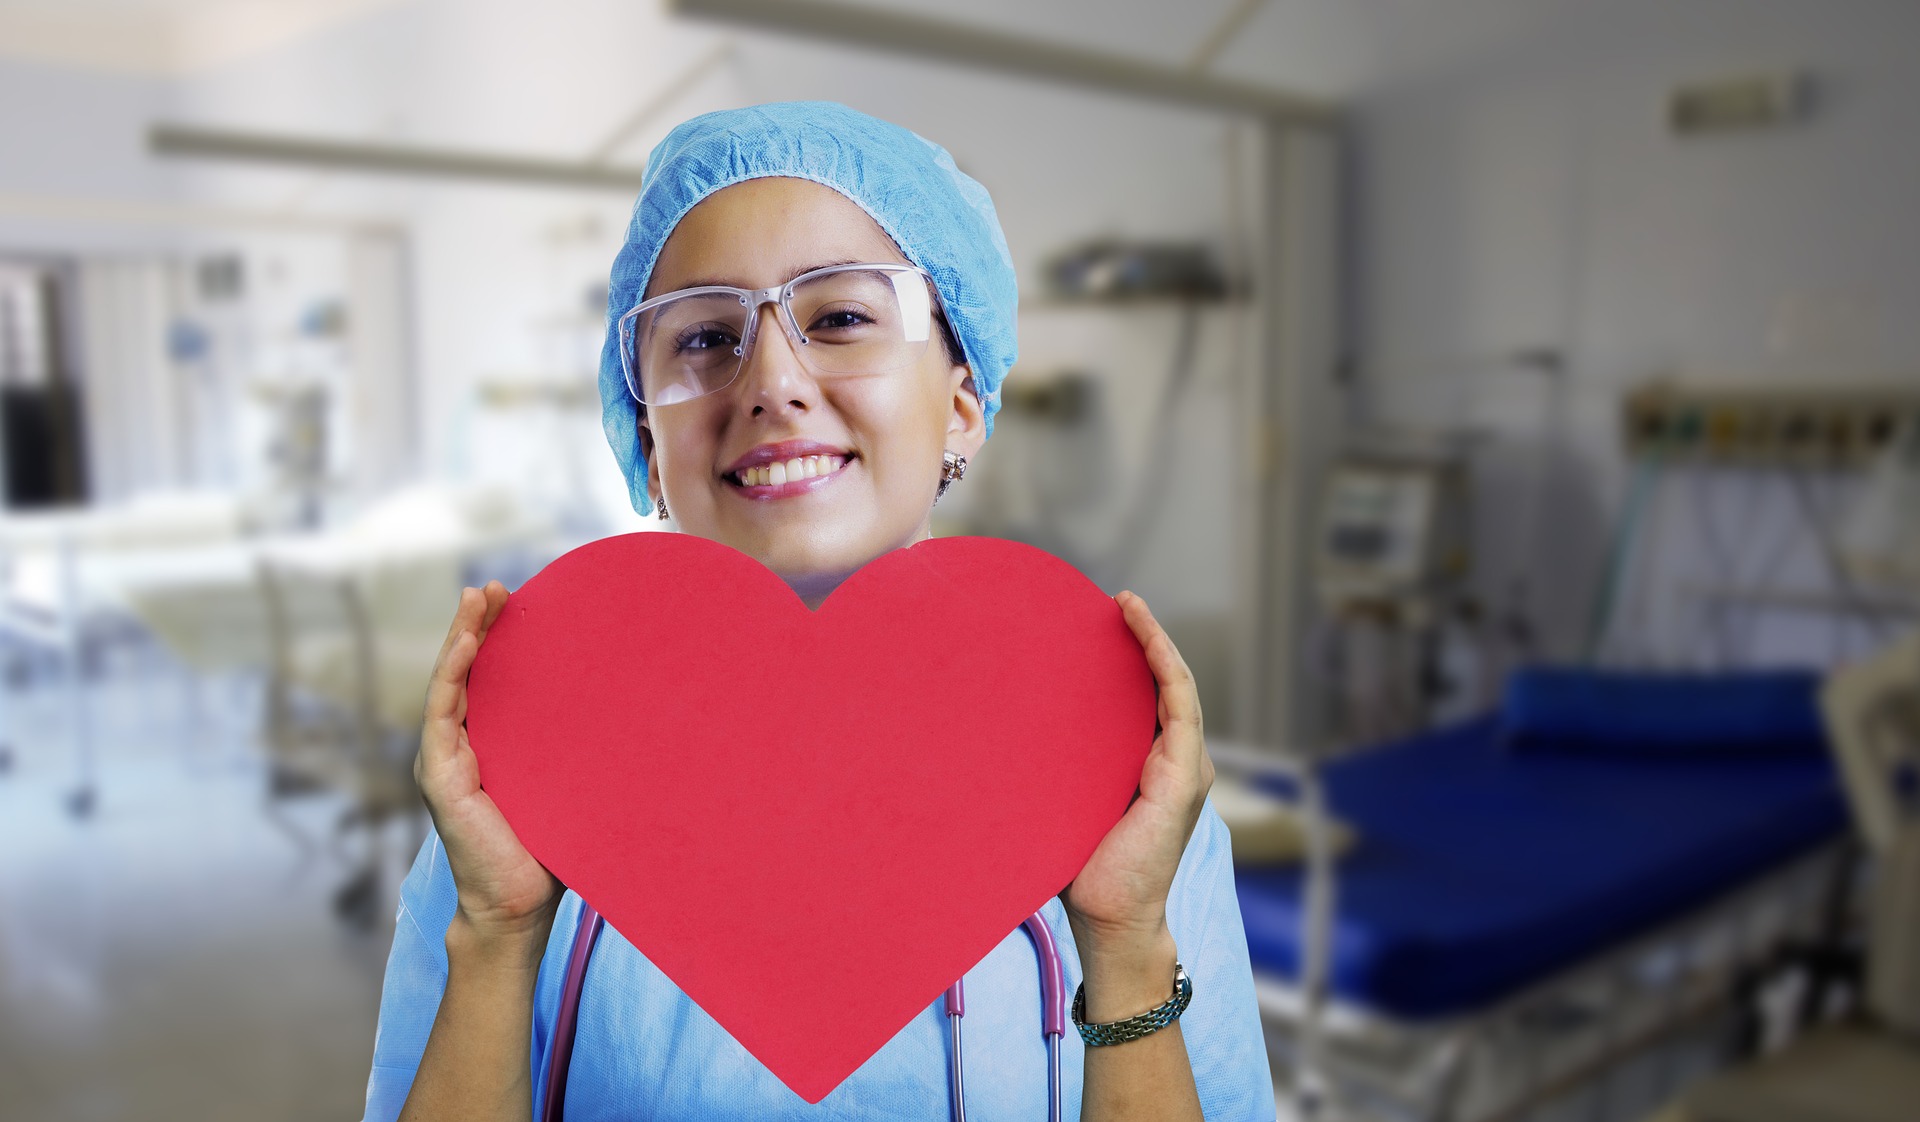 Doctor Holding Red Heart-shaped Cutout